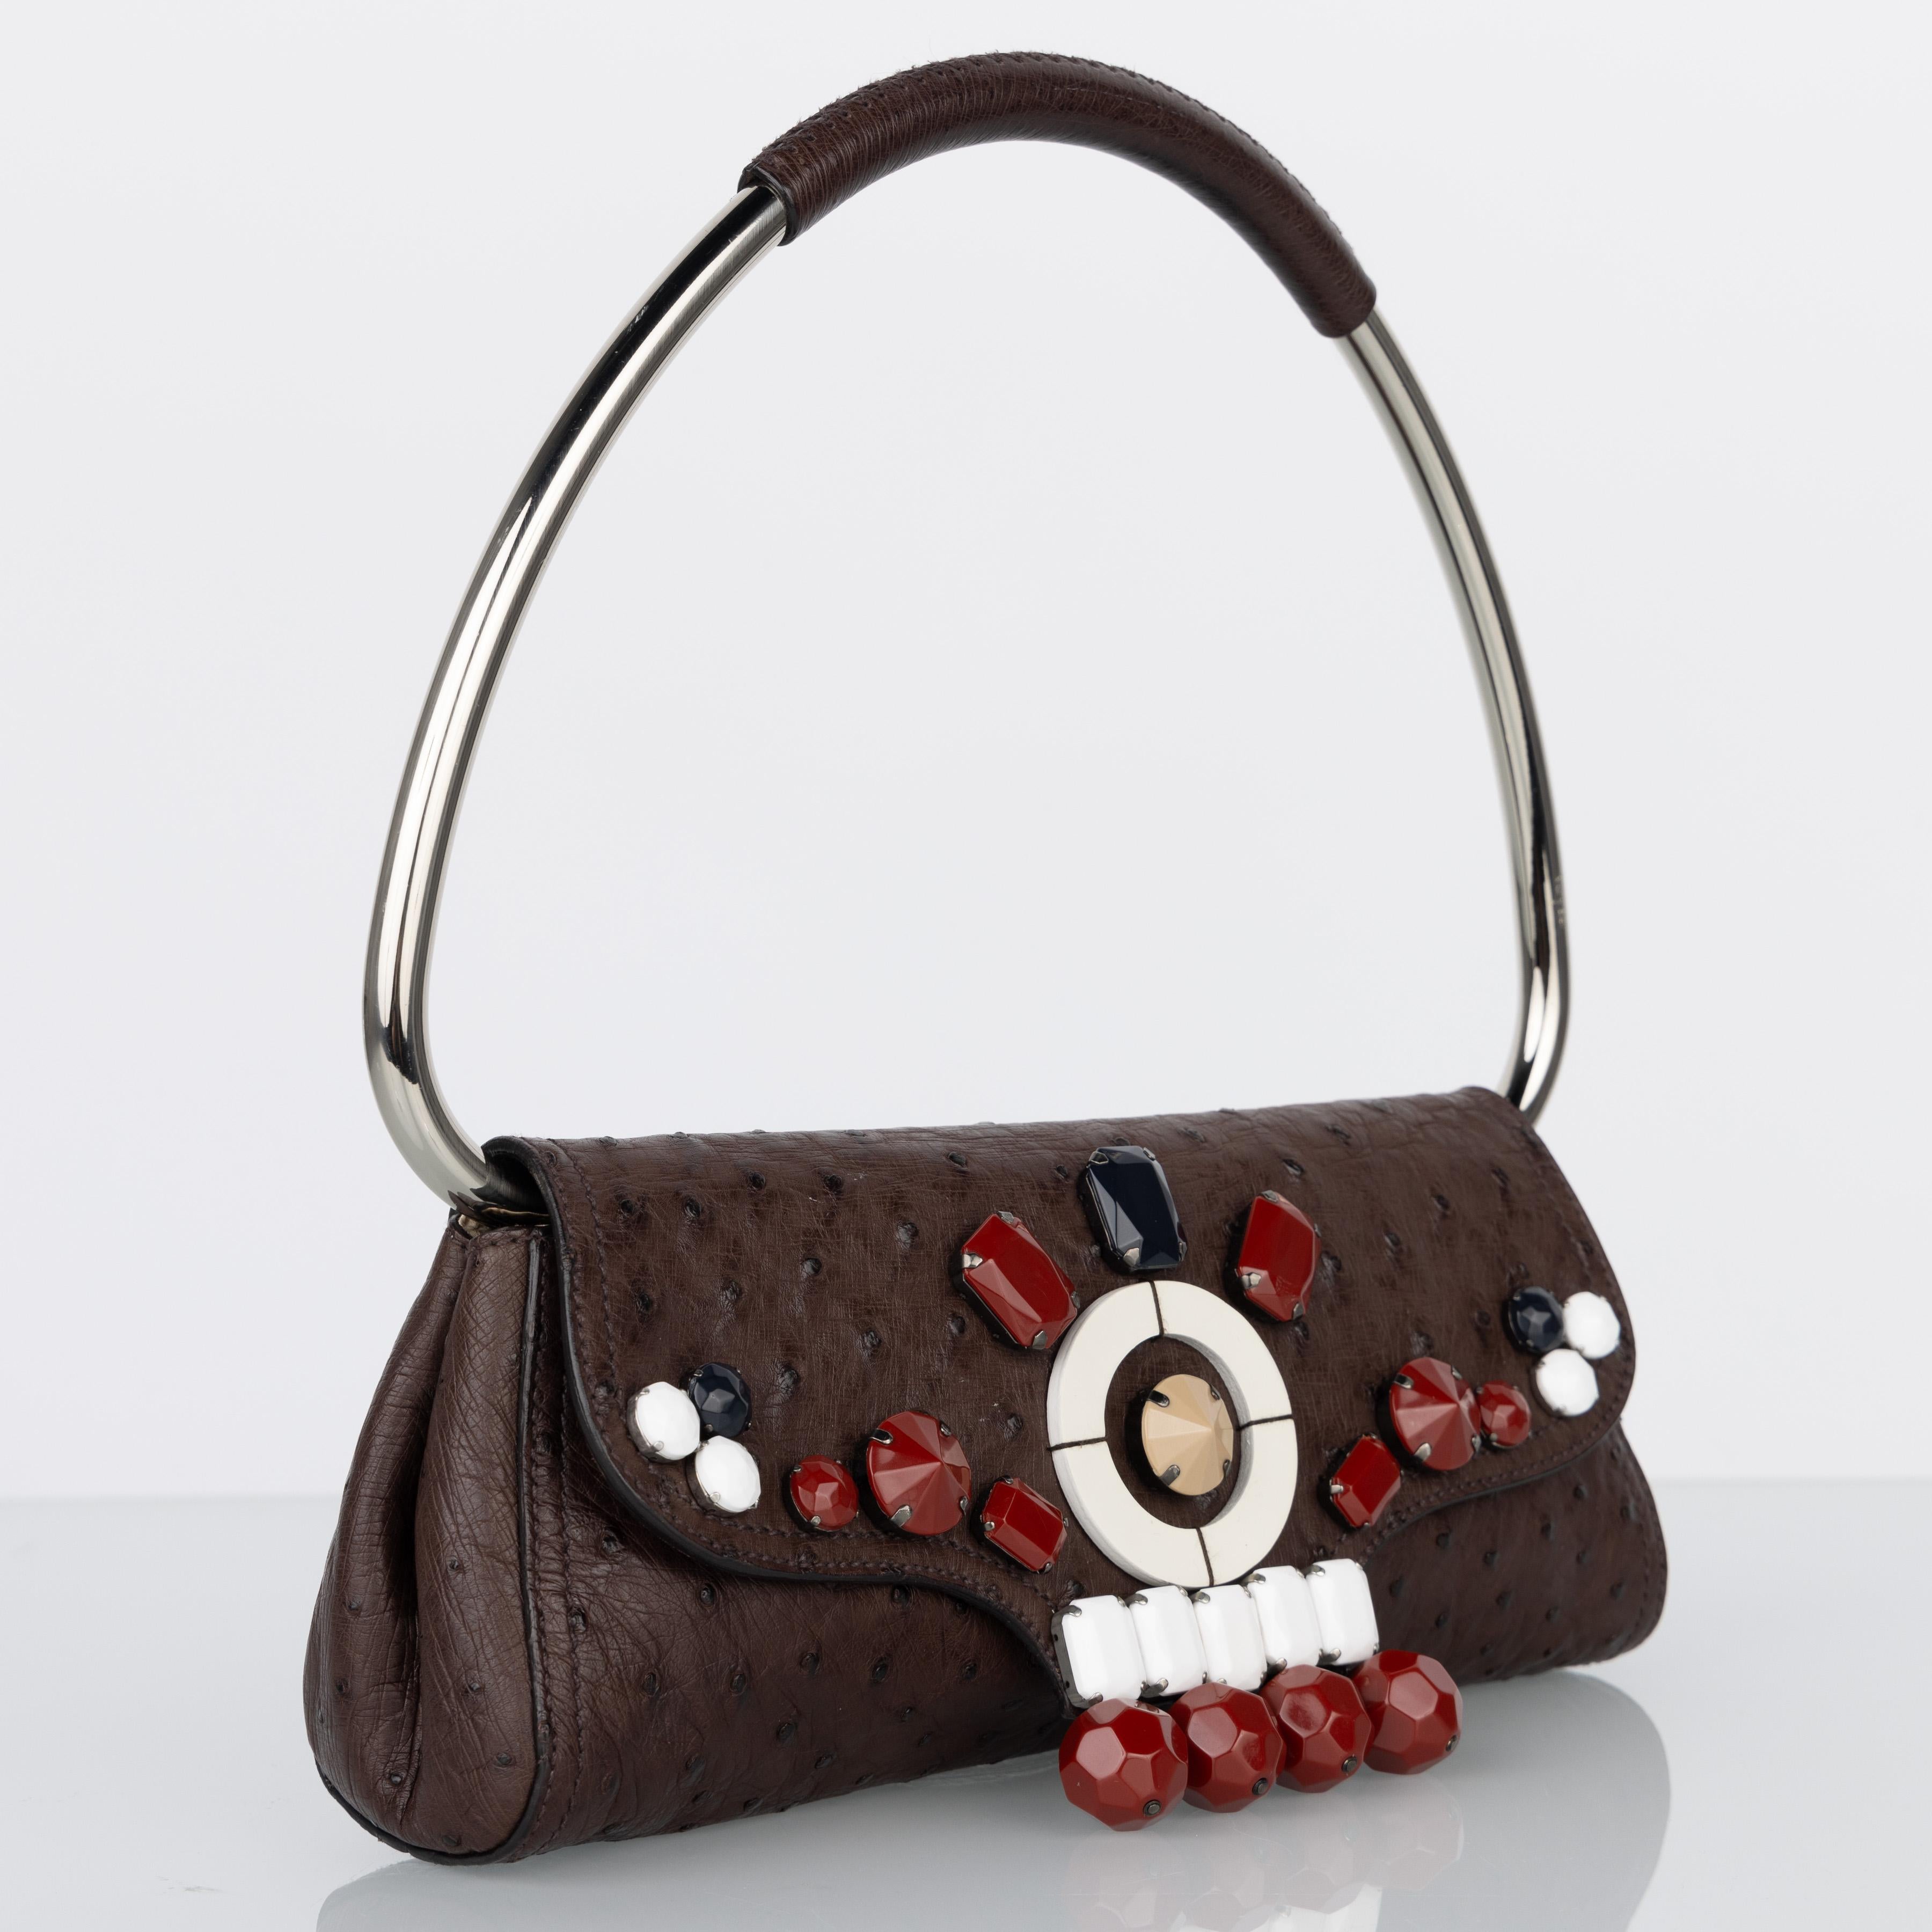 Prada Brown Ostrich Leather Jewel Embellished Swing Bag SS 2003 Archival Piece For Sale 1